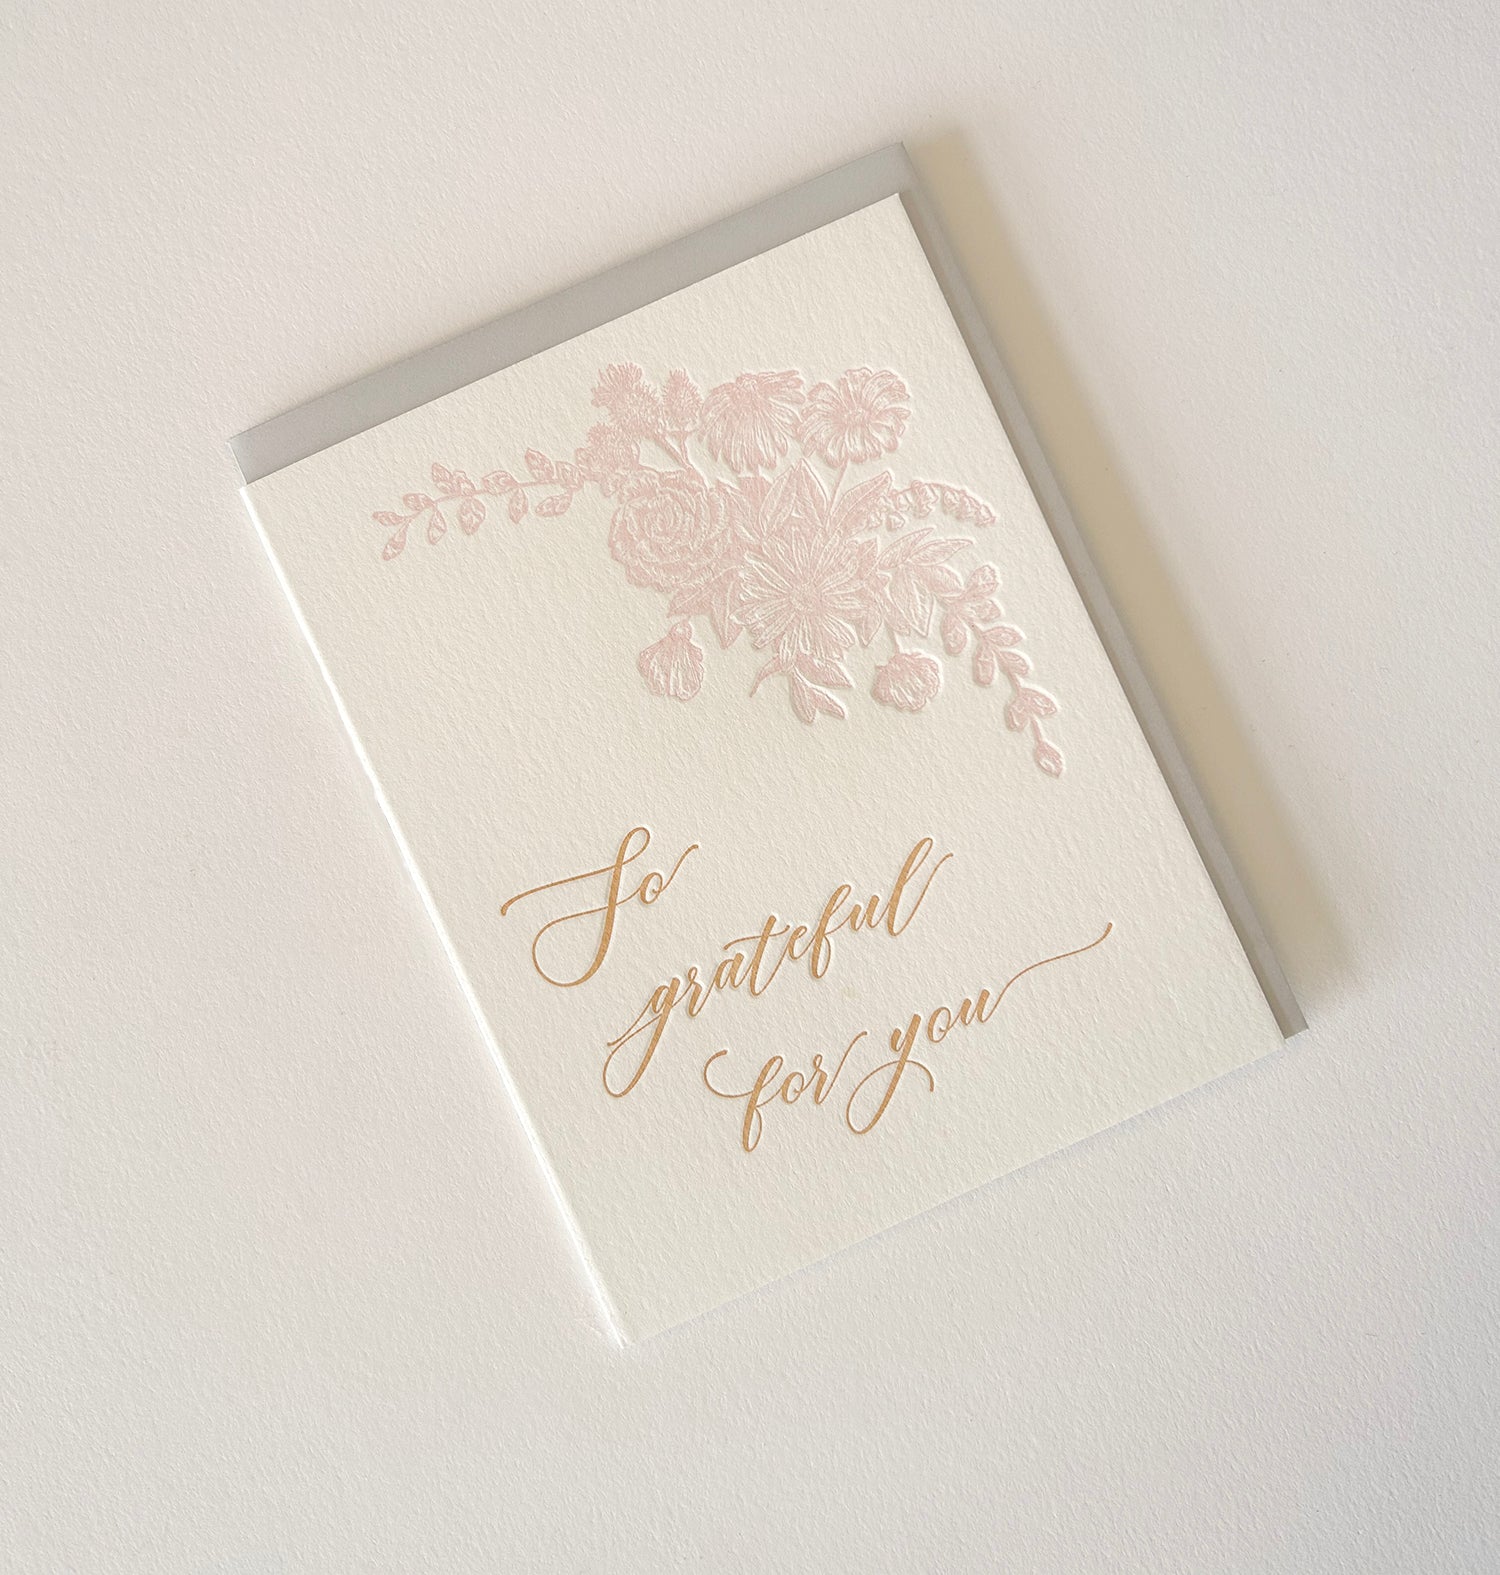 Letterpress thank you card with florals that says "So grateful for you" by Rust Belt Love